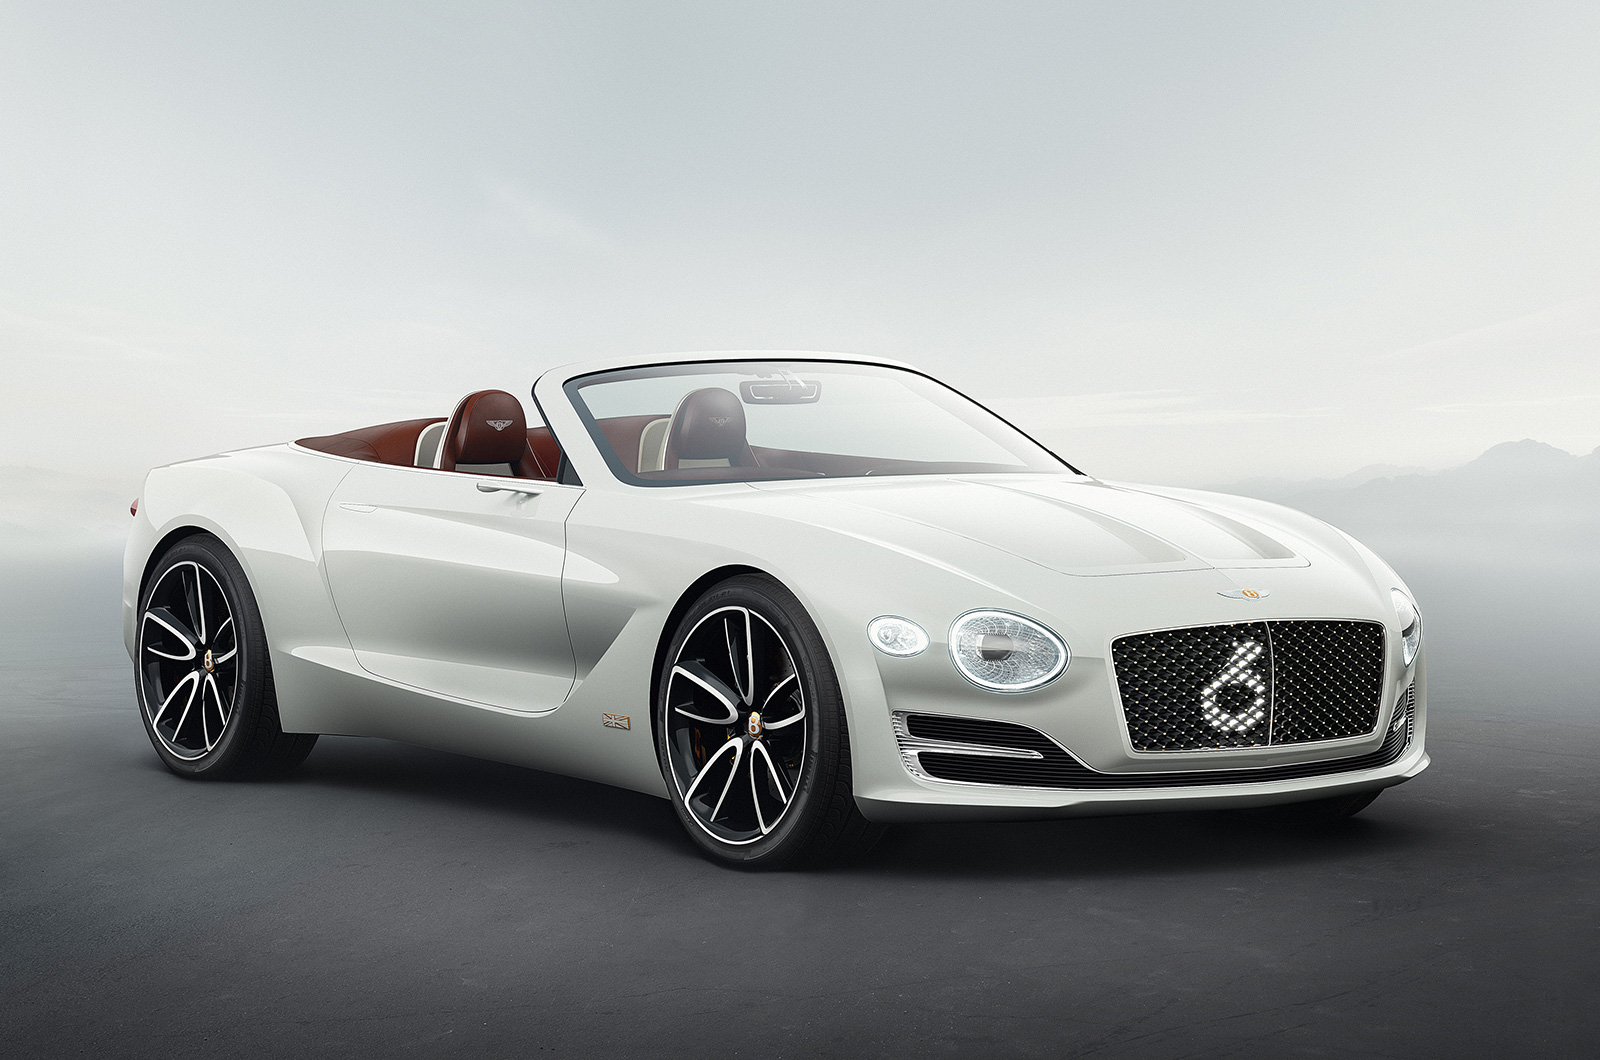 <p><span>Unveiled at the 2017 Geneva motor show as a concept, the EXP 12 Speed 6E was Bentley's proposal for a truly <strong>green luxurious grand tourer</strong>, with its electric powertrain. Effectively an electric drop-top version of the EXP10 Speed 6, Bentley didn't give much away about this concept, other than that it could make production within two years. So maybe the company is about to reveal something very exciting for its centenary…</span></p><p><em><span>We hope you enjoyed this story. To easily access more like it, why not sign up to receive our email newsletter? </span><b>Autocar </b></em><span><em>will make sure you are up to date with the latest from the world of motoring, sending you the best comment, analysis and opinion from our industry experts, and our reviews of the world's best cars, direct to your inbox. And signing up takes less than 30 seconds.</em> </span><a href="https://rebrand.ly/xmj4ll"><b>Click here to sign up</b></a></p>